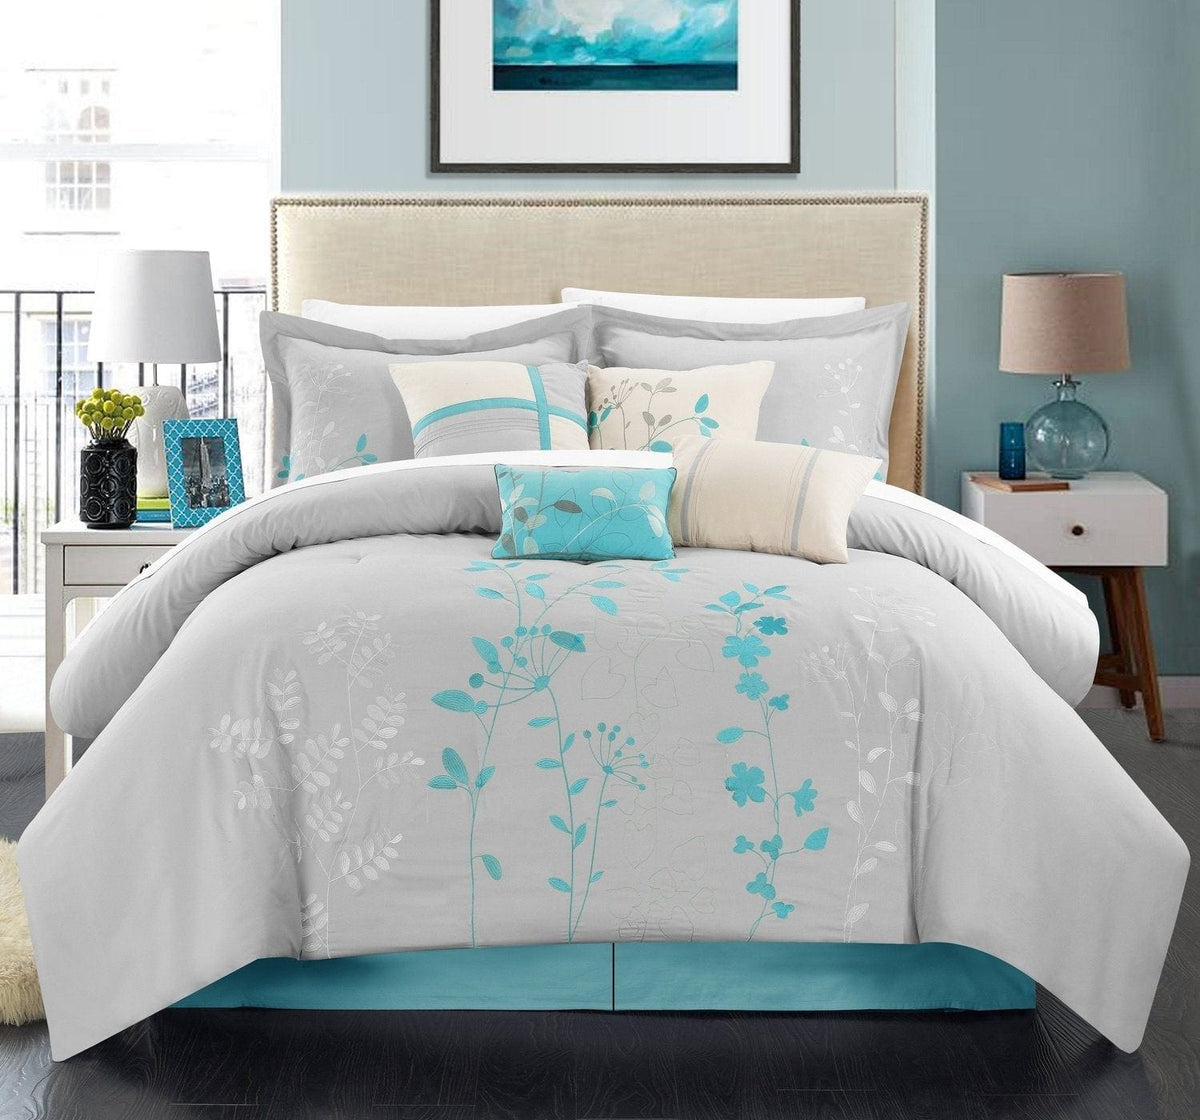 Chic Home Bliss Garden 12 Piece Floral Comforter Set Turquoise